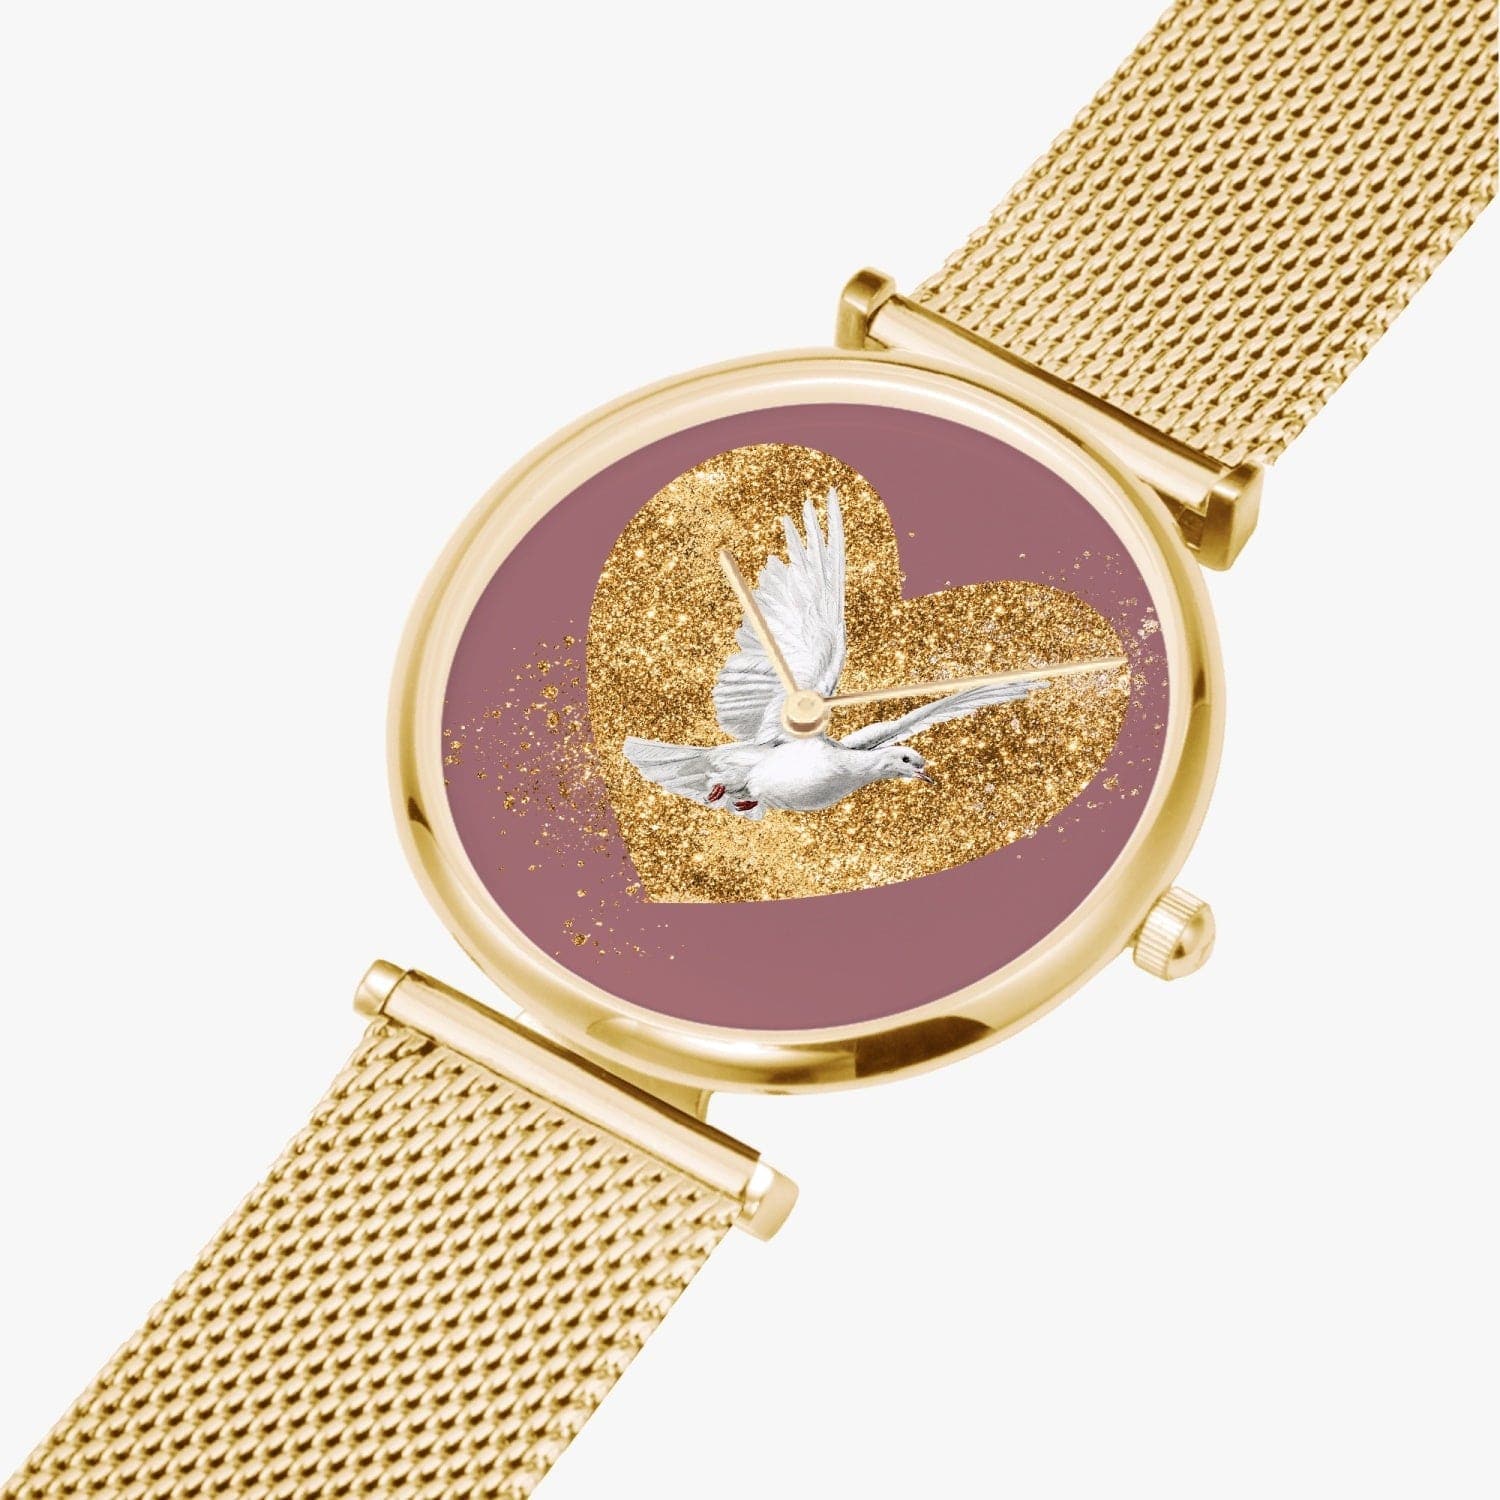 Give your heart wings, New Stylish Ultra-Thin Quartz Watch, designed by Sensus Studio Design